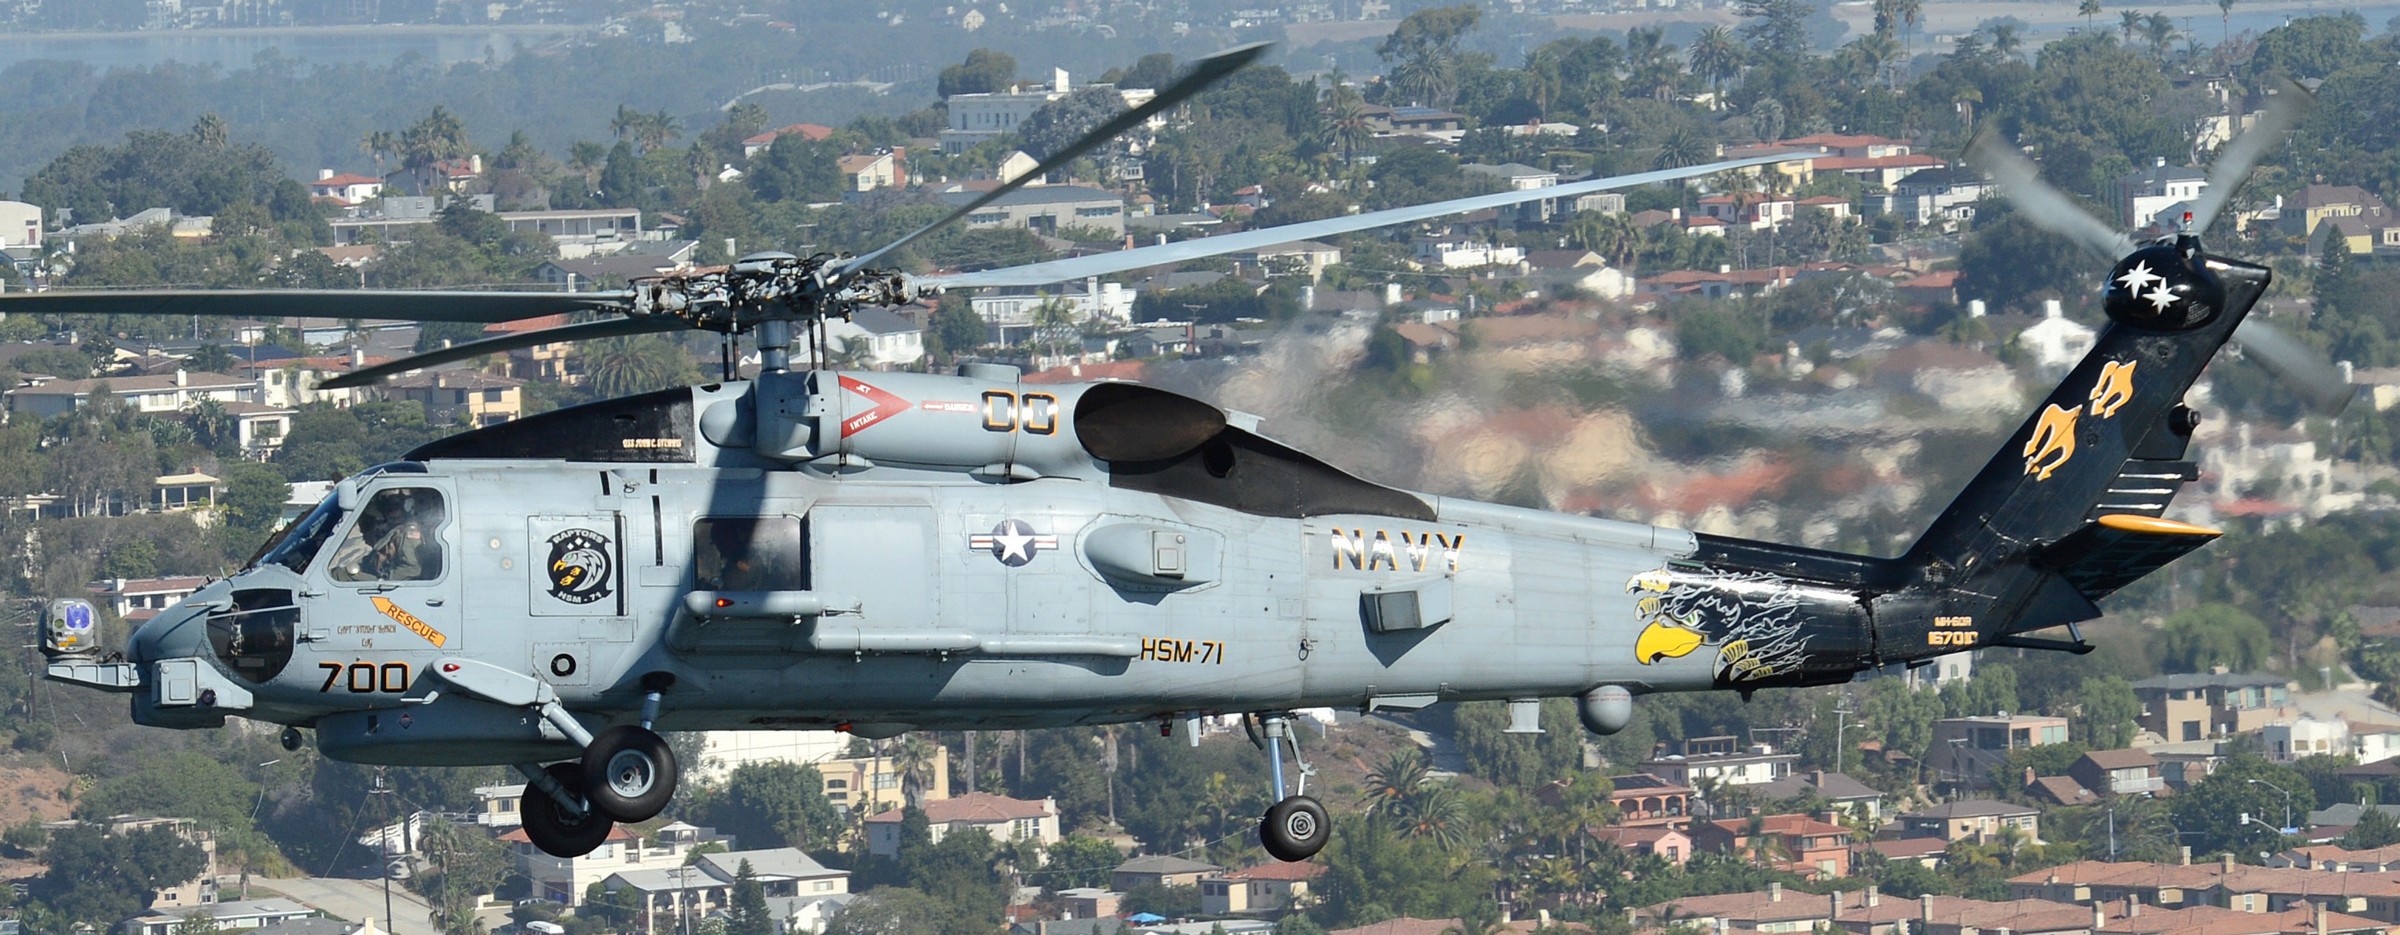 hsm-71 raptors helicopter maritime strike squadron mh-60r seahawk navy 2014 68 special painting color showbird